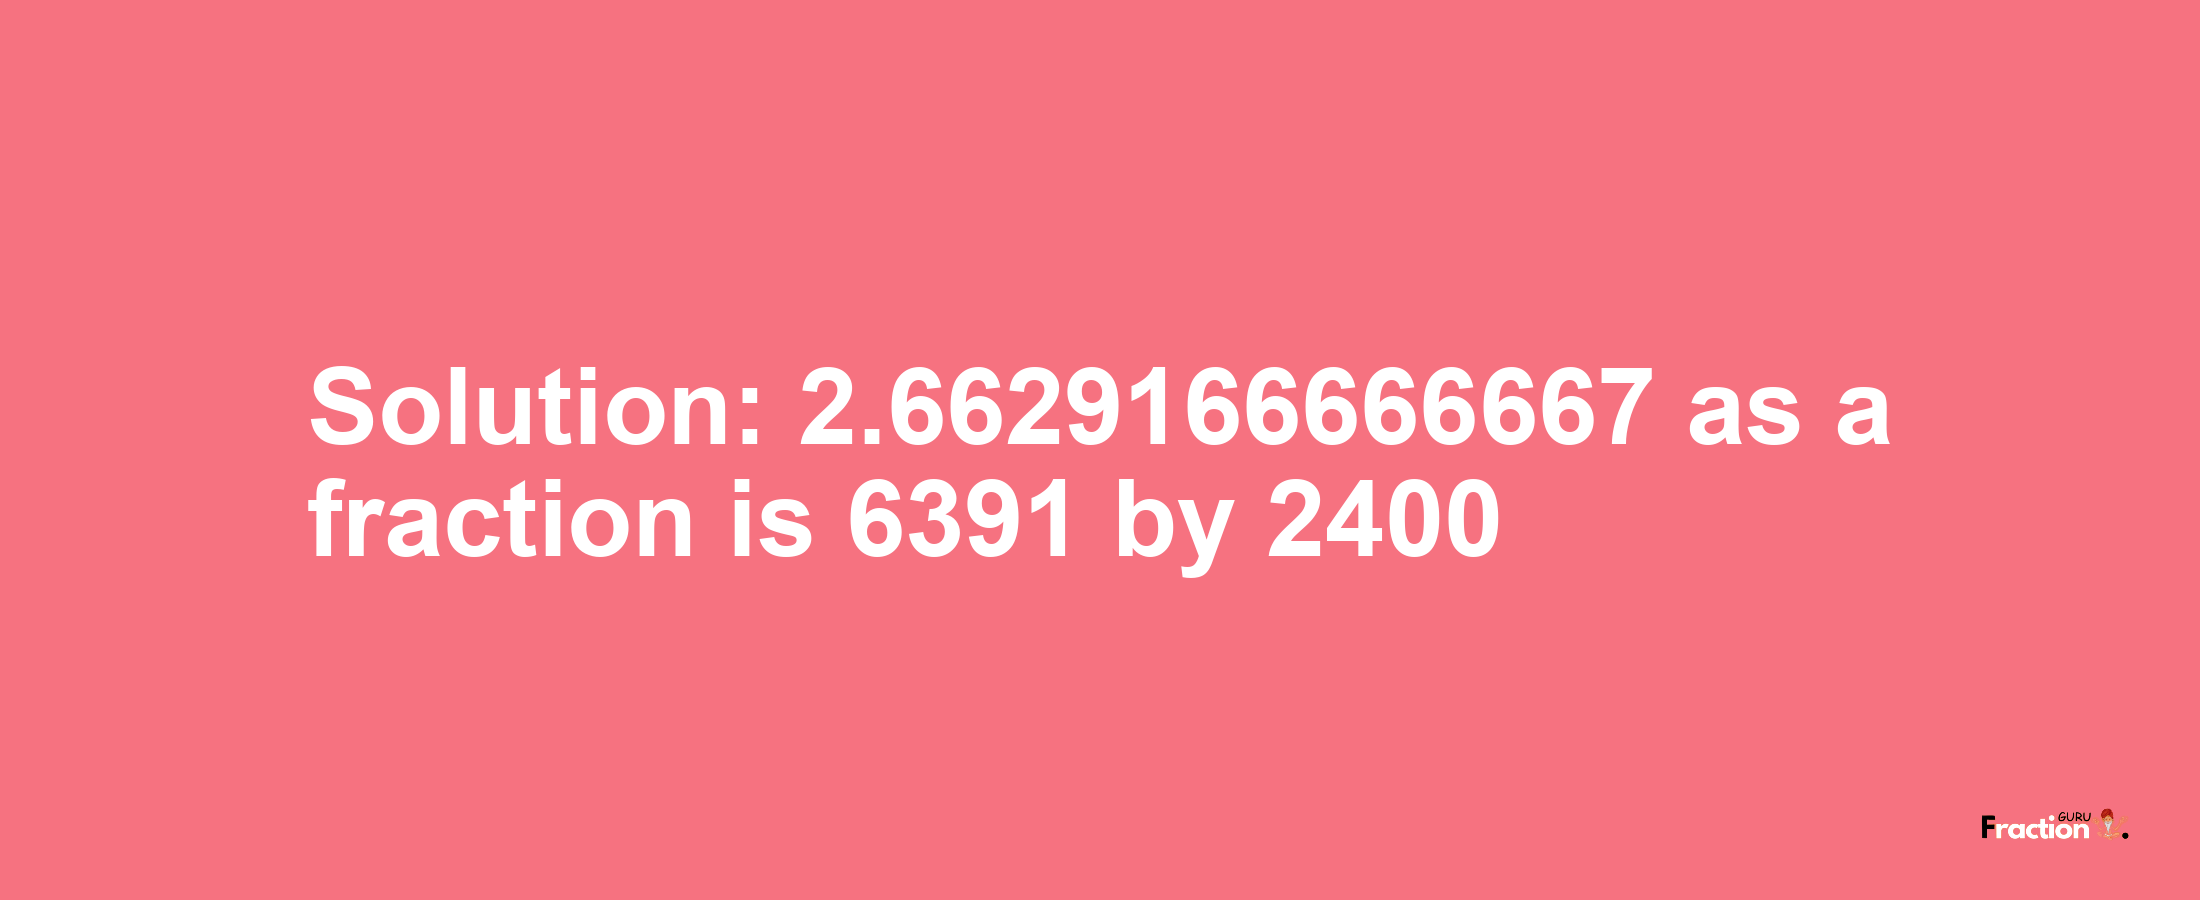 Solution:2.6629166666667 as a fraction is 6391/2400